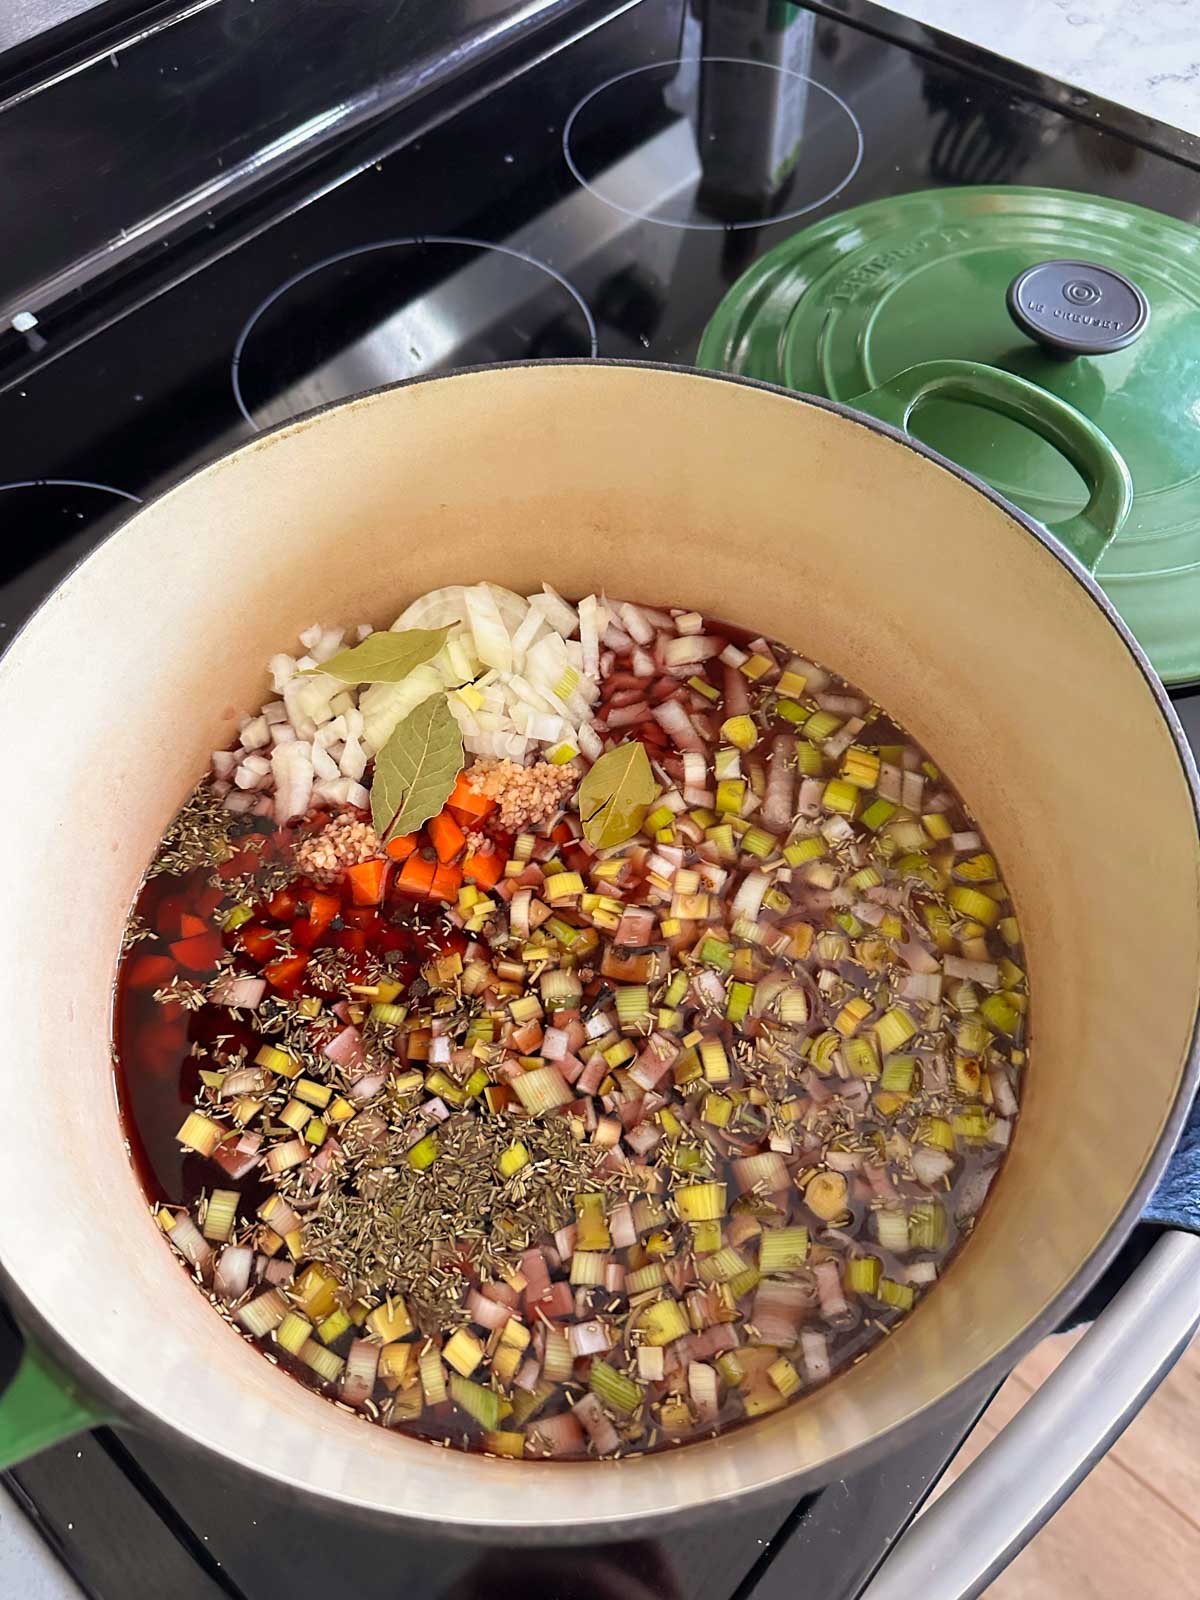 A dutch oven filled with all the ingredients for the sauerbraten marinade, ready to cook.